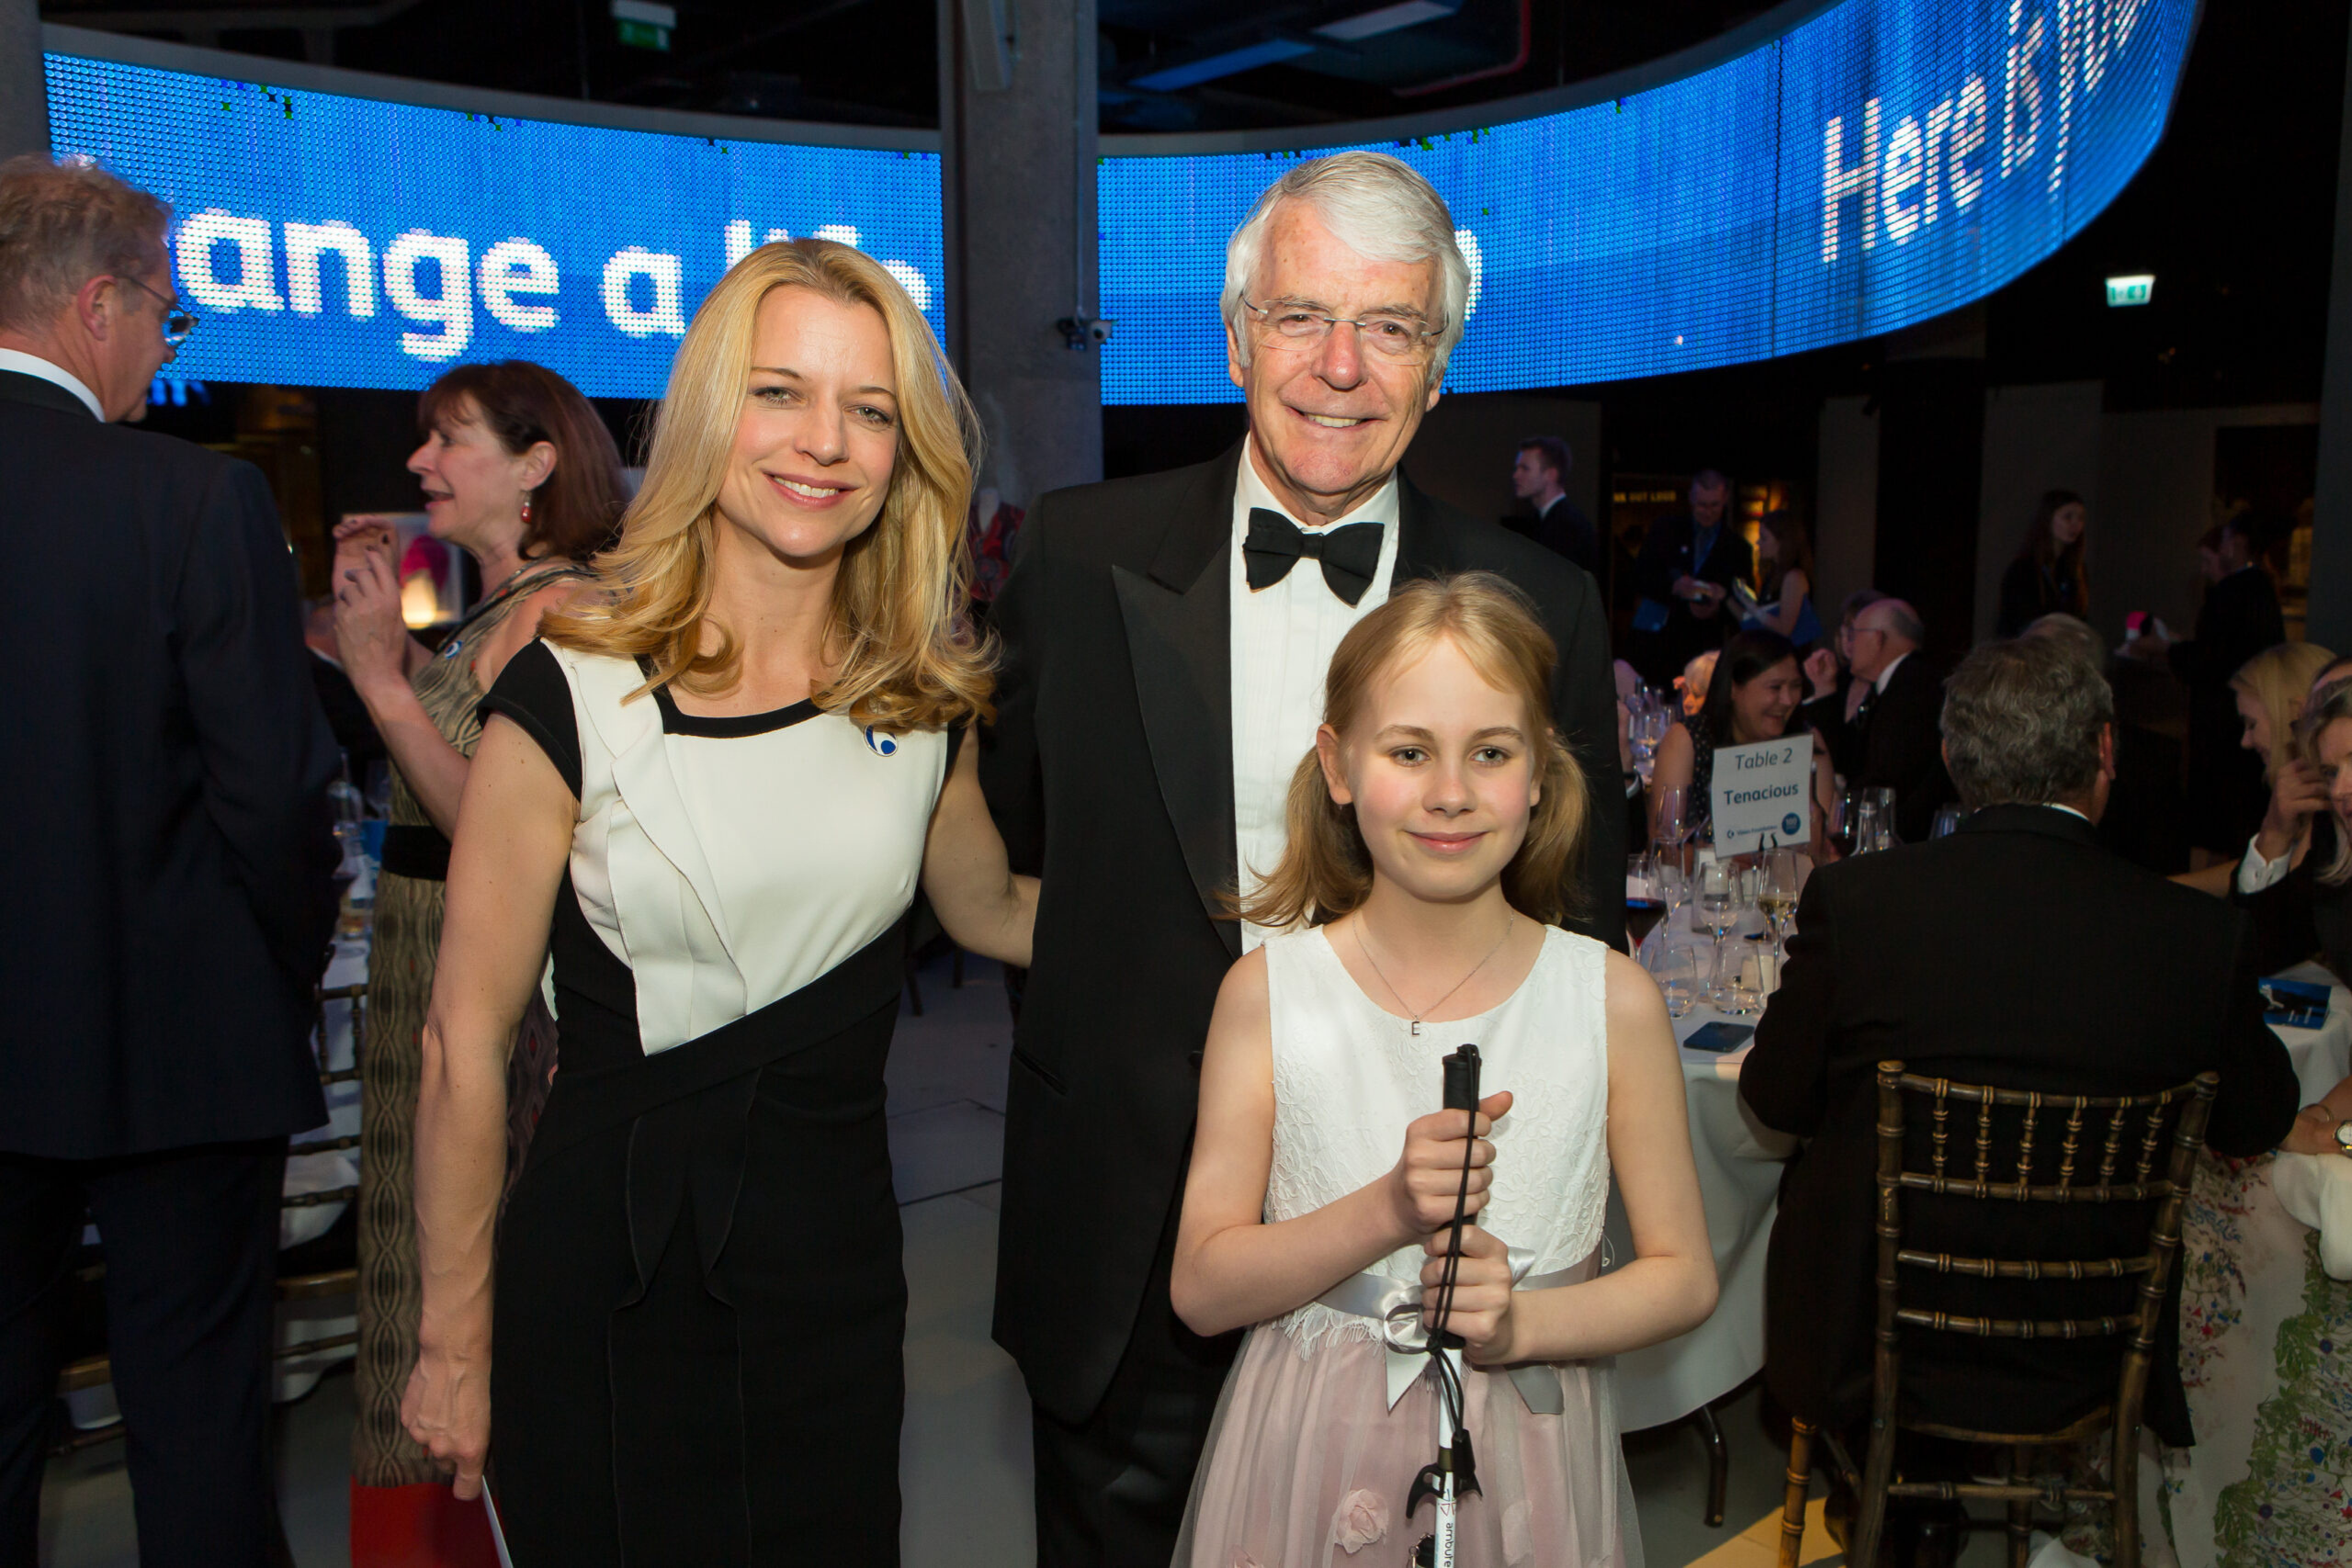 Olivia Curno with Sir John Major and Eleanor Stollery